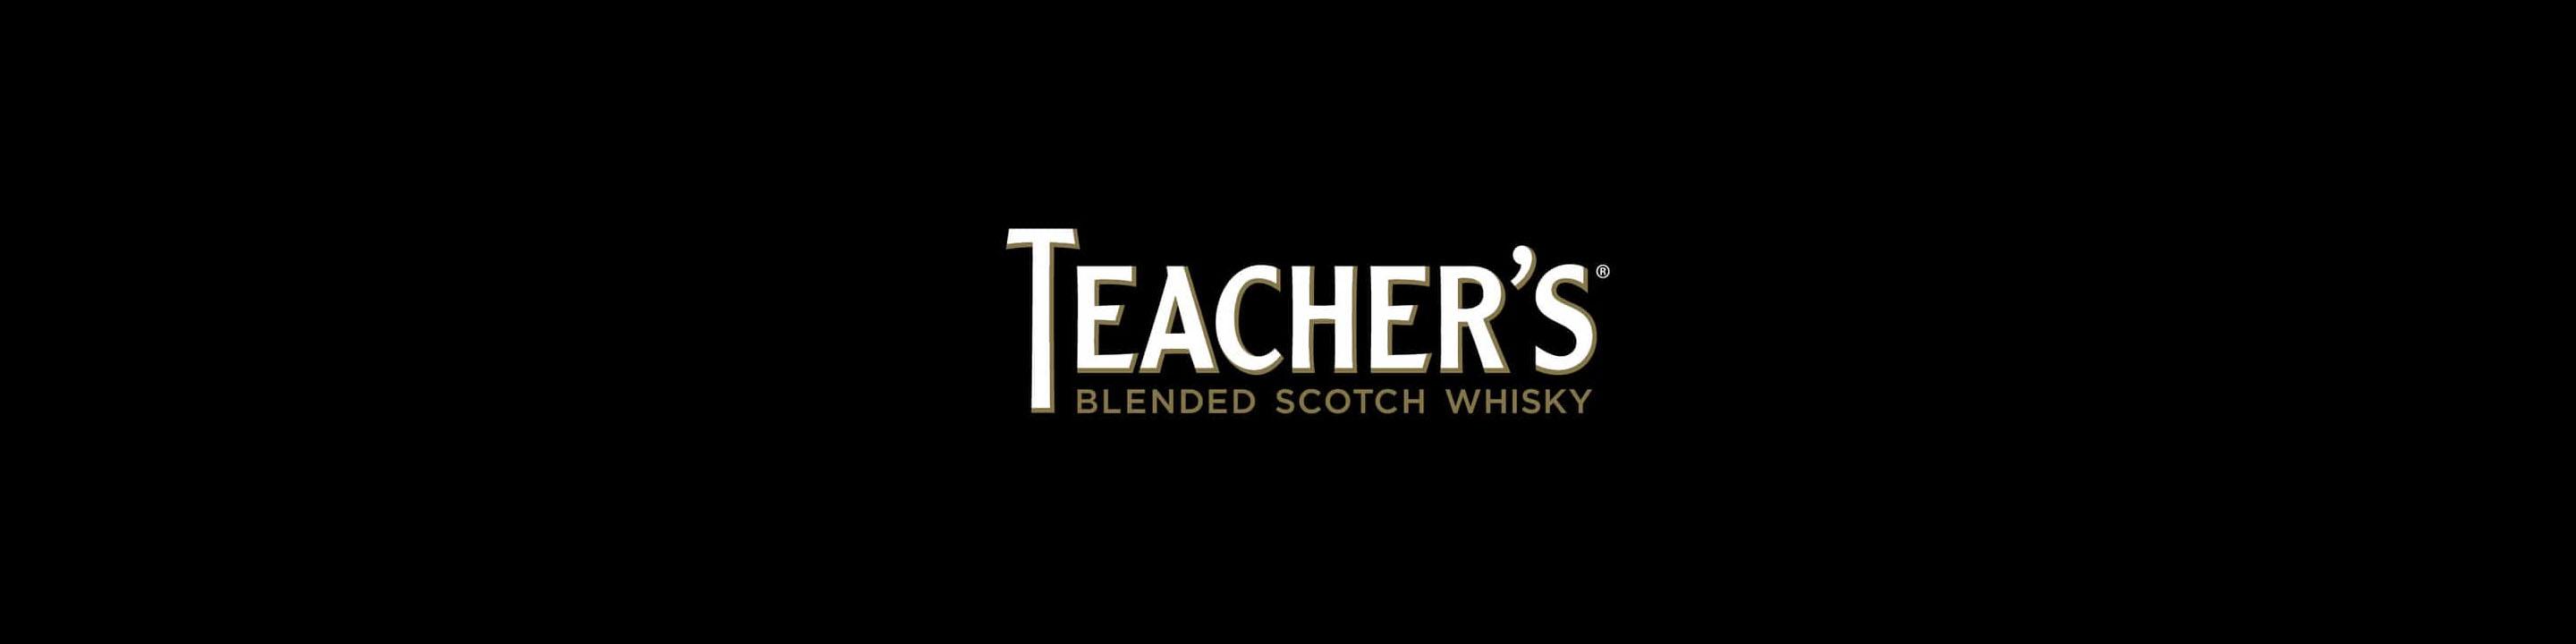 William Teacher was a man of self-belief. Over 175 years ago he perfected his famous blend with high smoky peated malt giving it a rich flavor and amber color. The heart of Teacher’s comes from the Ardmore distillery. The sweet smoke rises up to flavor the barley, adding depth and character to the whisky.

Buy Teacher's online now from nearby liquor stores via Minibar Delivery.